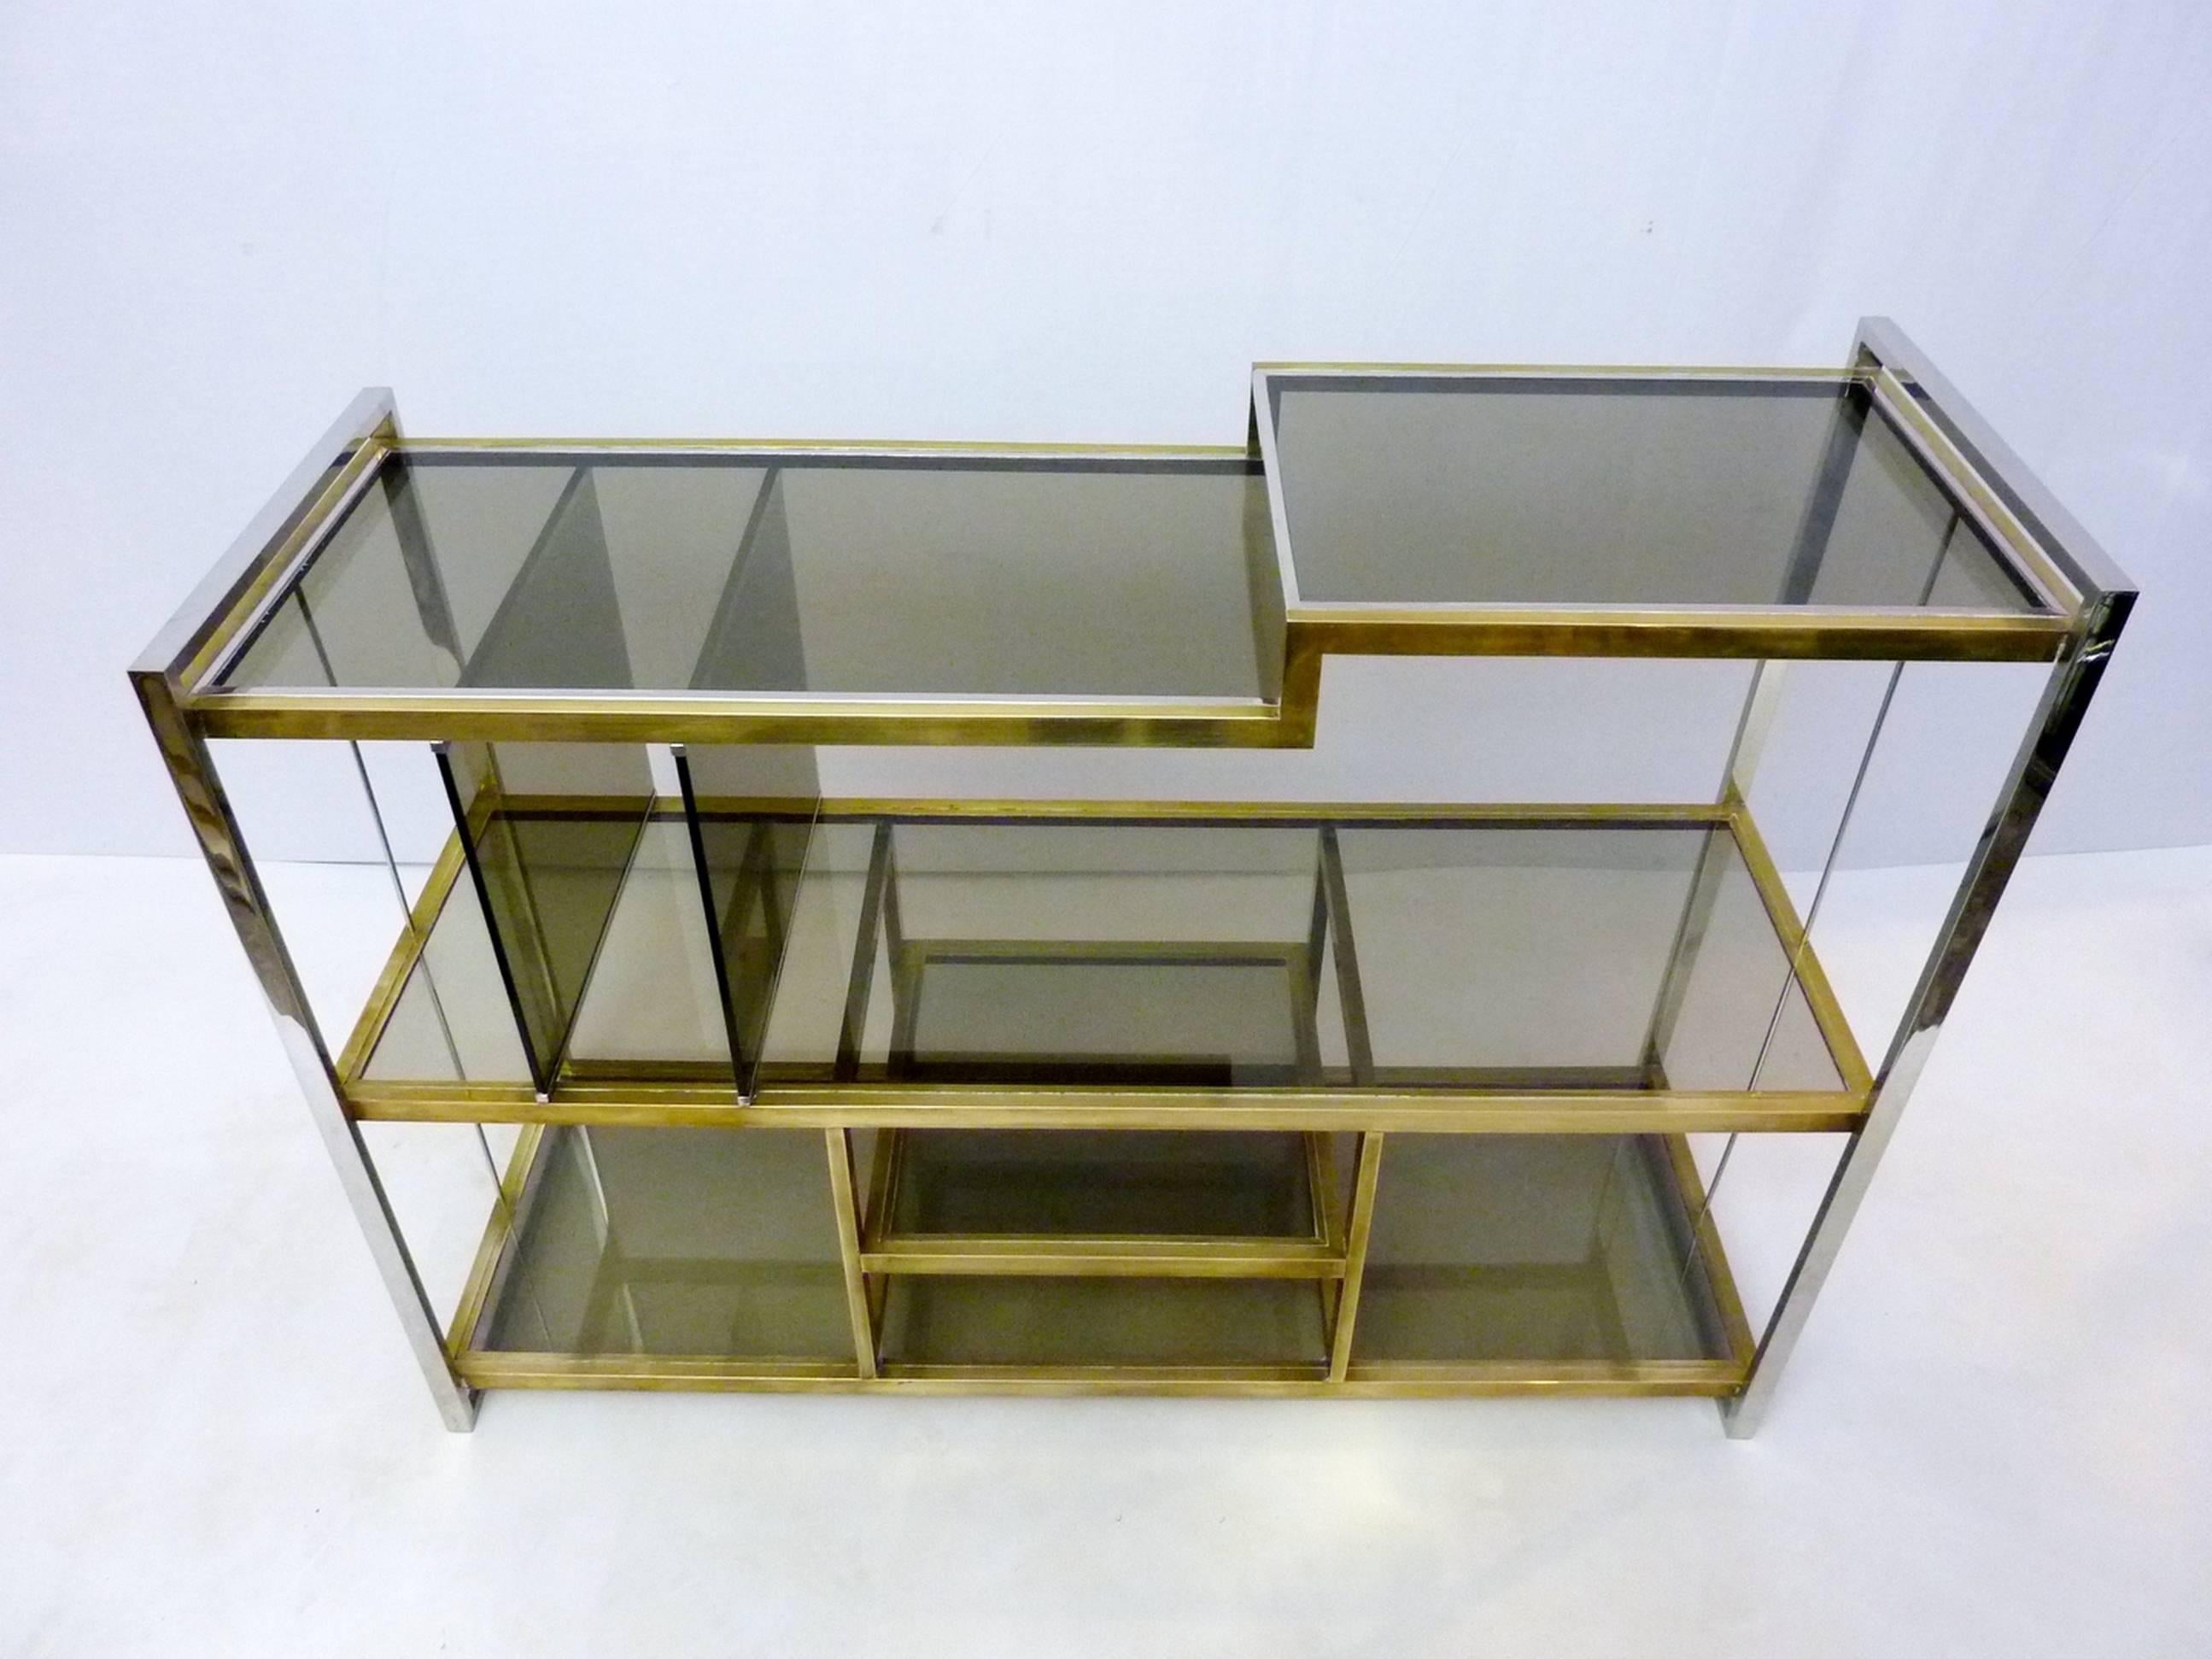 Console in brass, chrome and smoke colored glass designed by Serantoni & Arcangeli, Italy for New Ideas Inox.